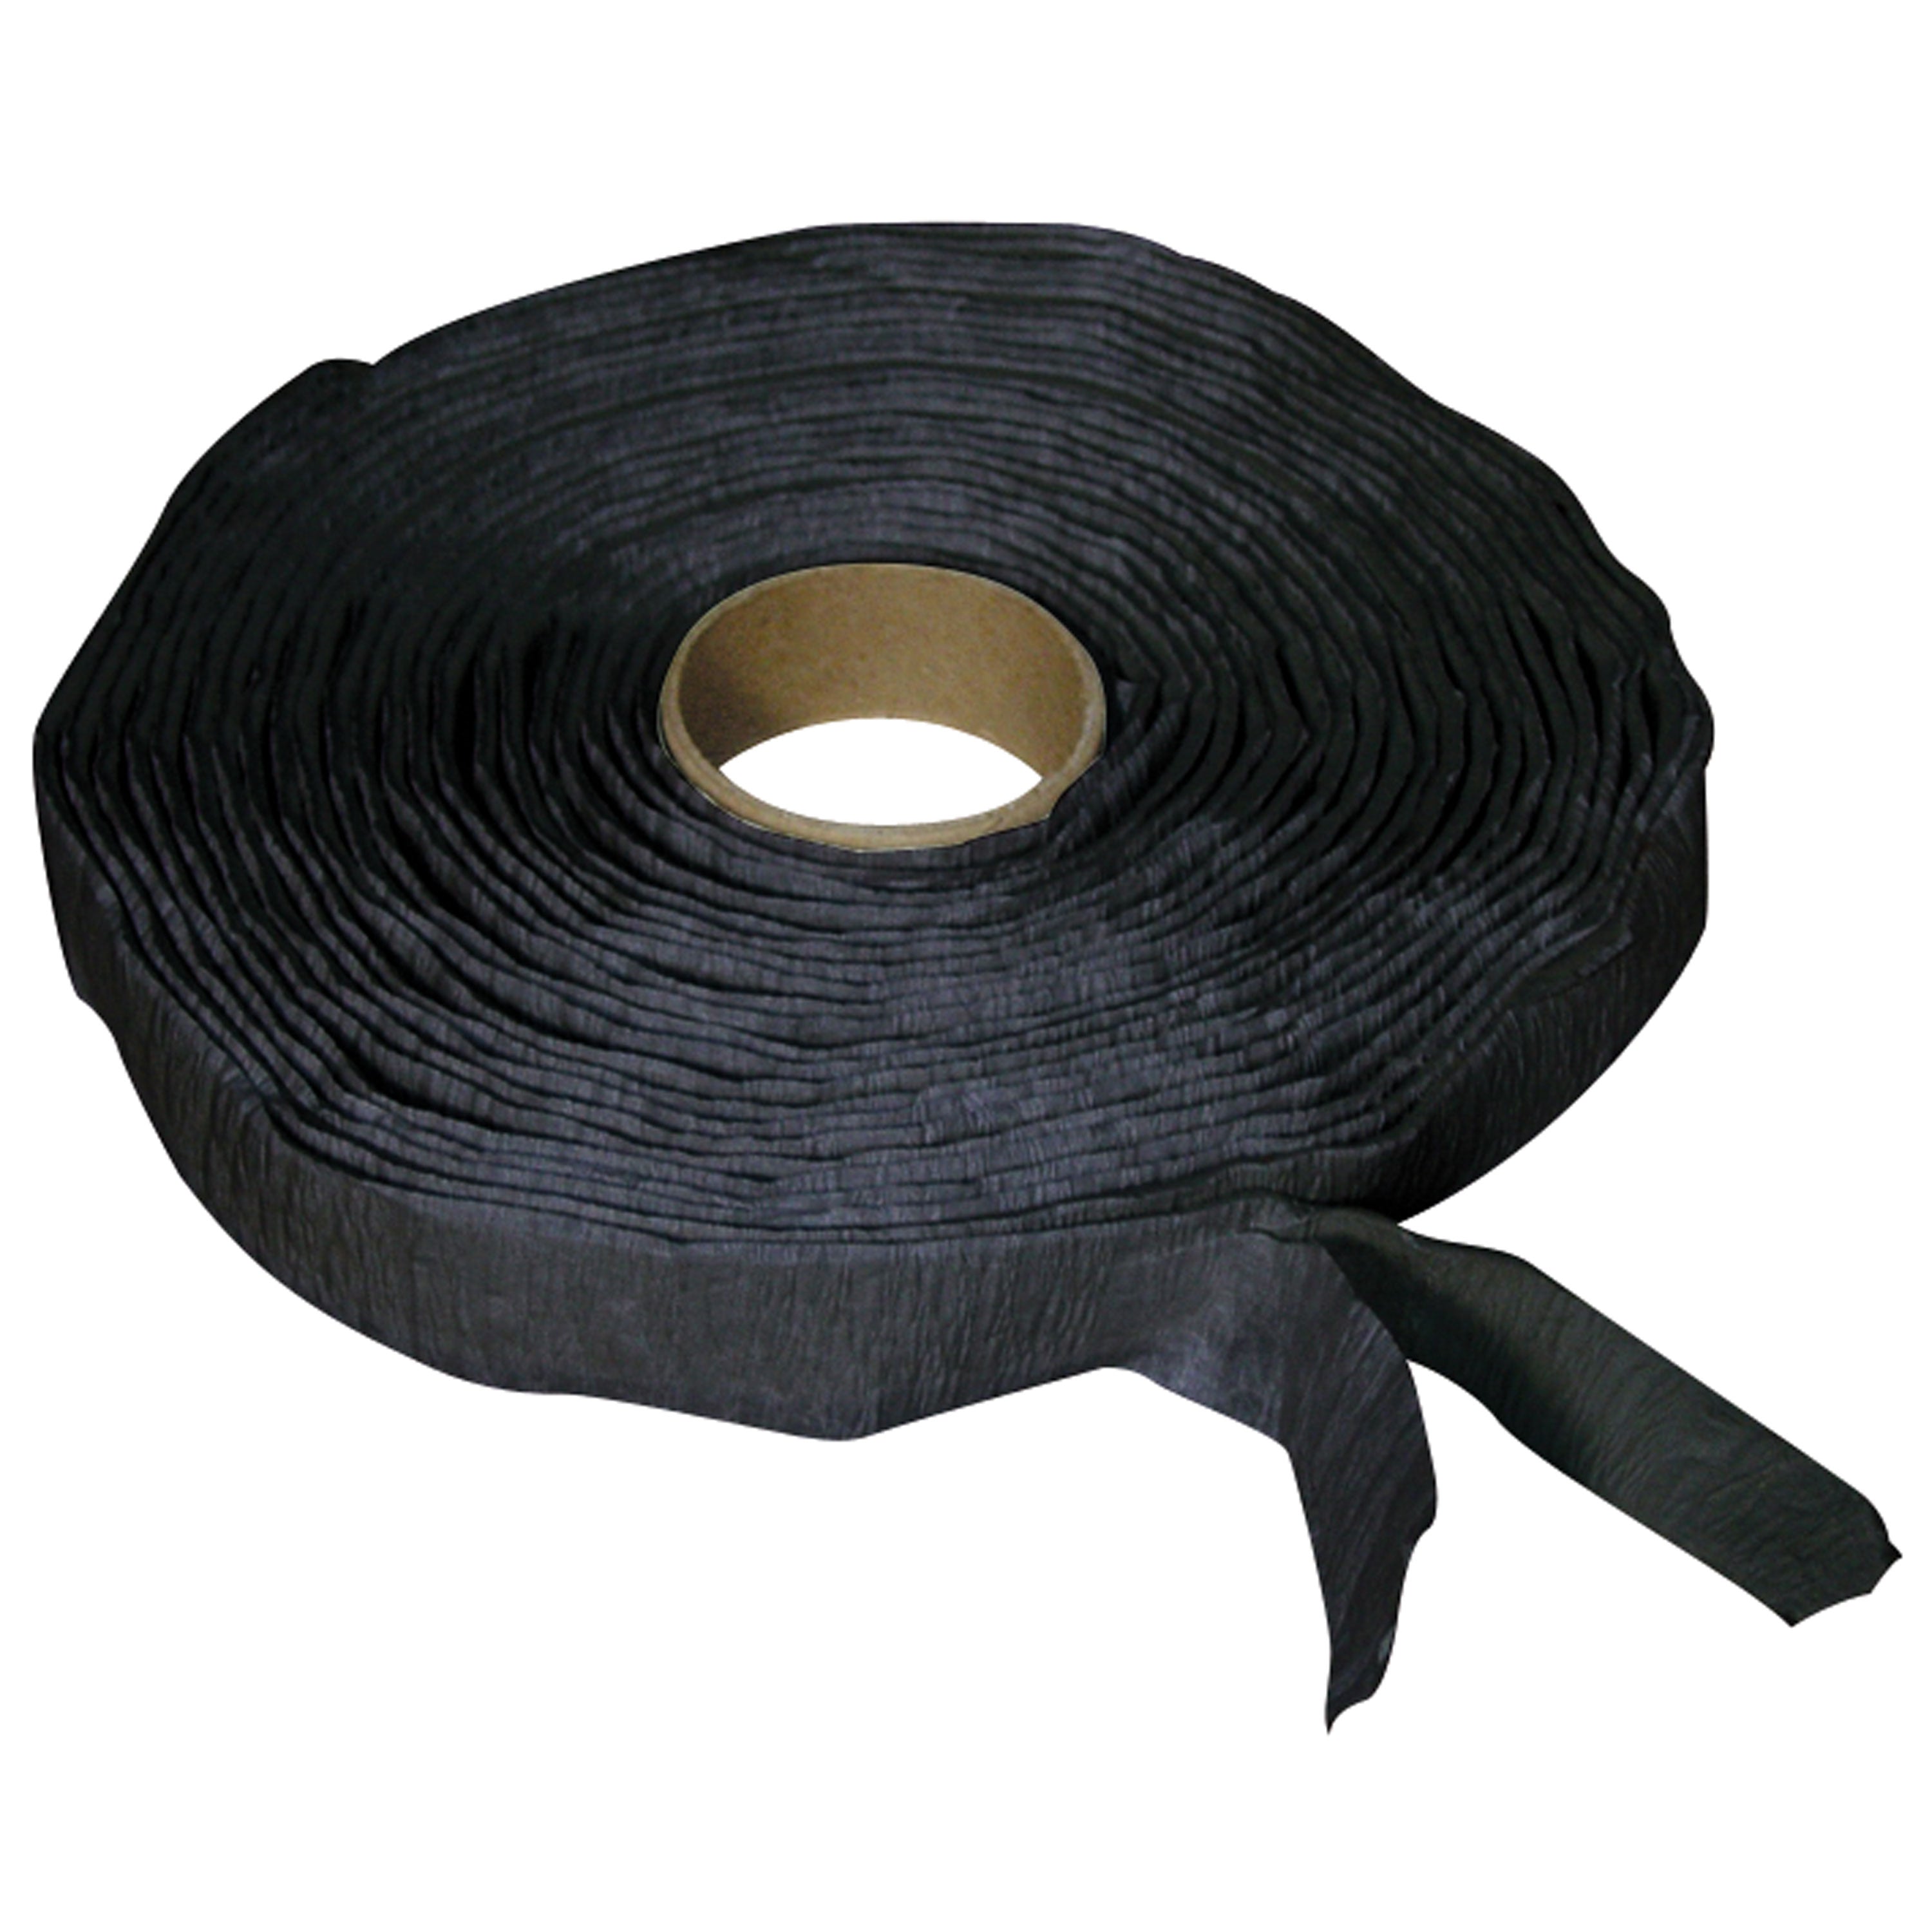 Heng's 16-5031 Non-Trimmable Butyl Tape, Black - 1/8" x 3/4" x 30'